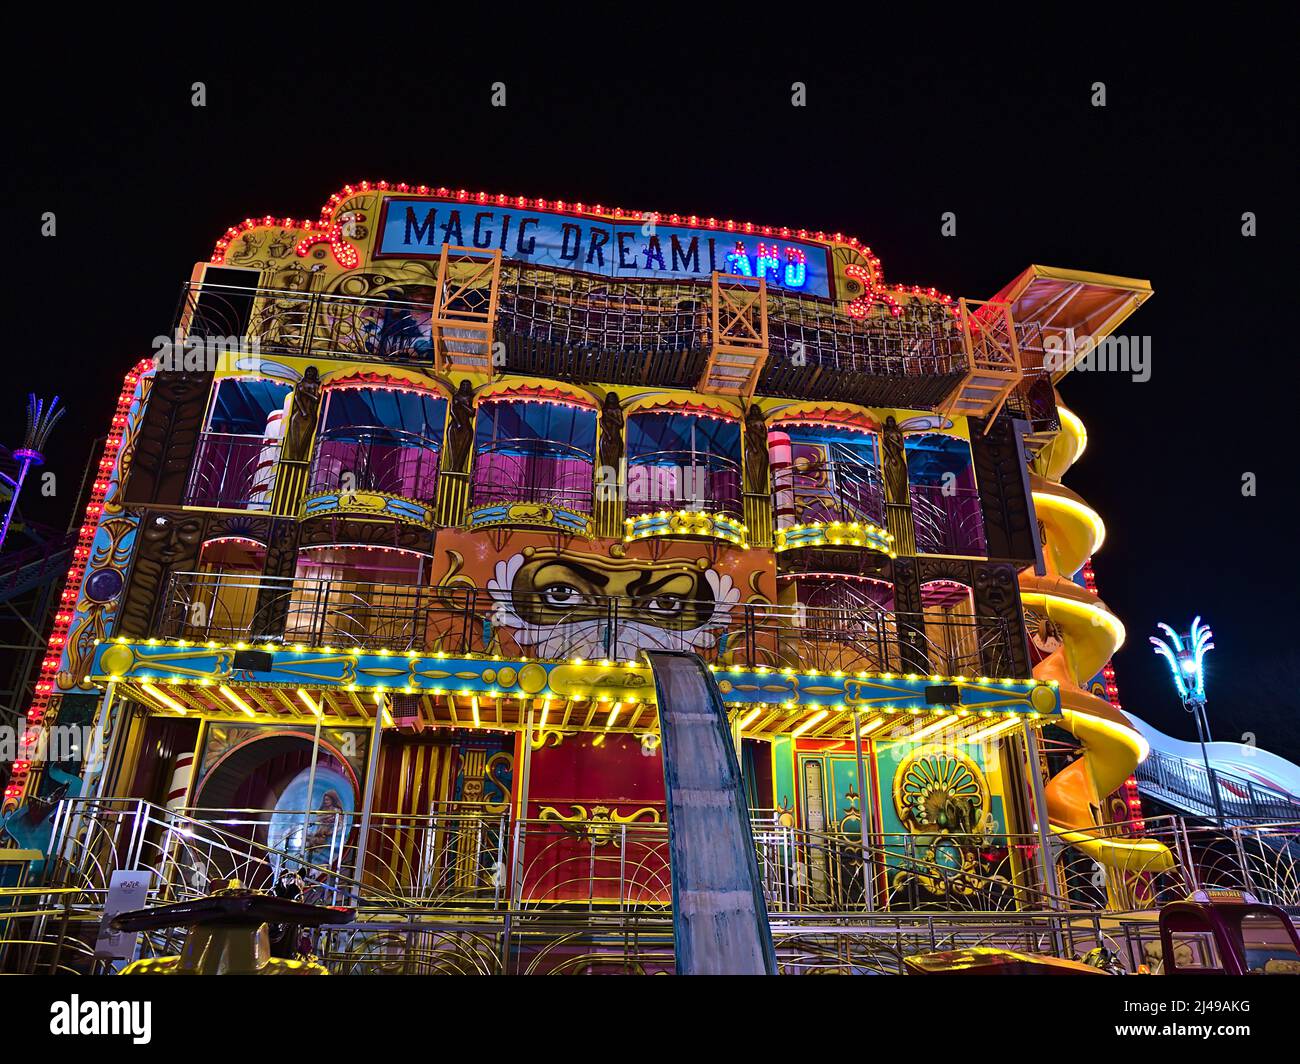 View of amusement park ride 'Magic Dreamland' in Wurstelprater near Wiener Prater in Vienna, Austria in the dark night with colorful lights. Stock Photo